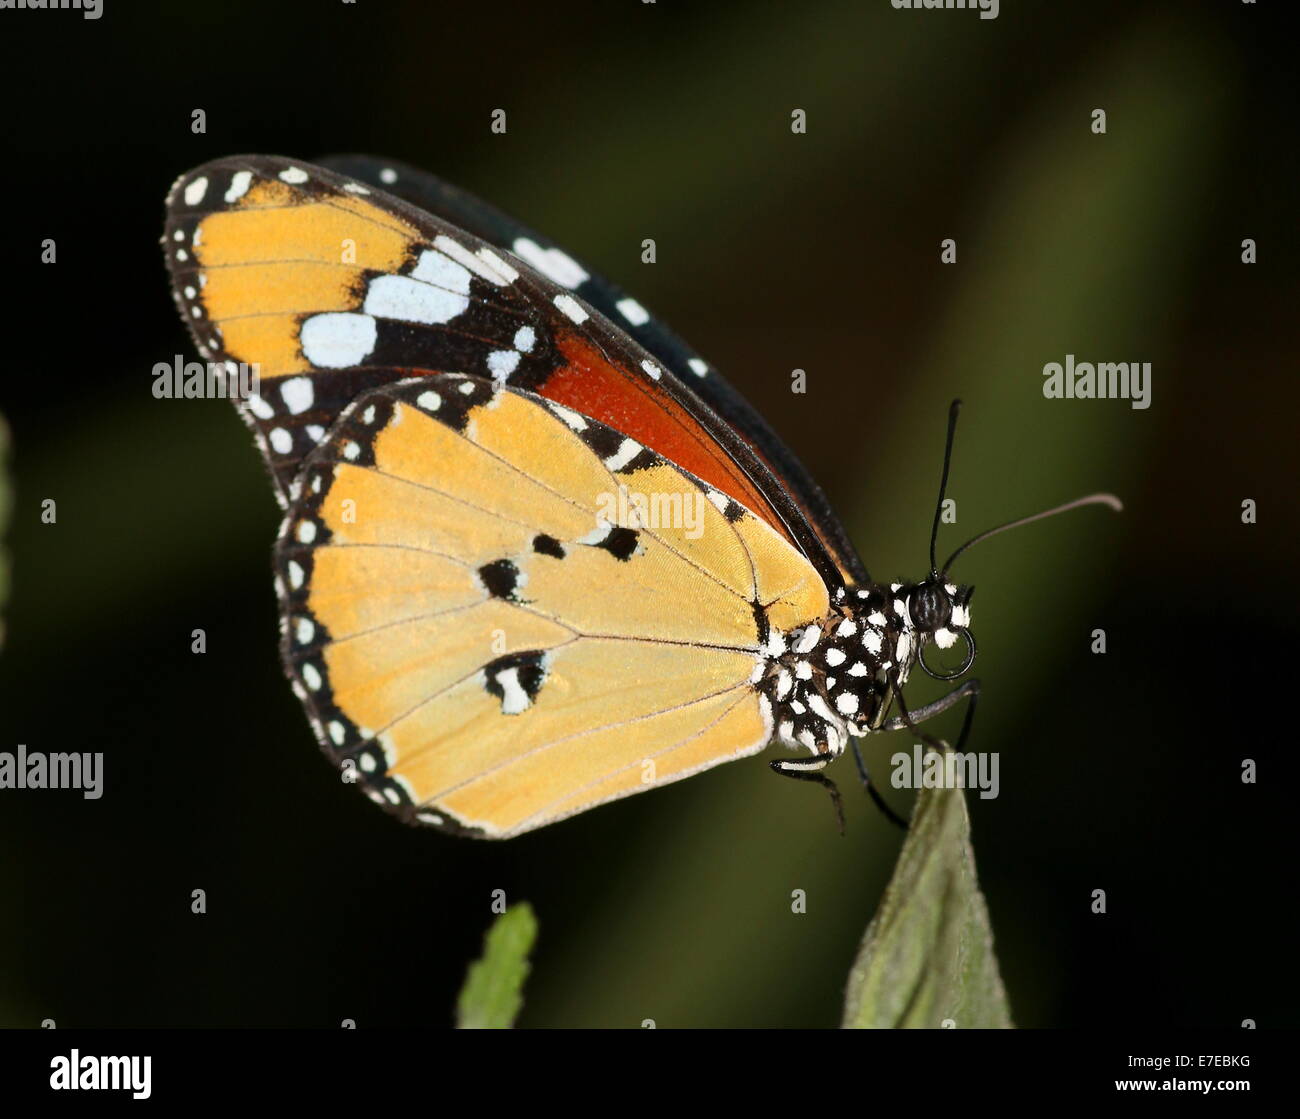 Plain Tiger or African Monarch butterfly (Danaus chrysippus) Stock Photo